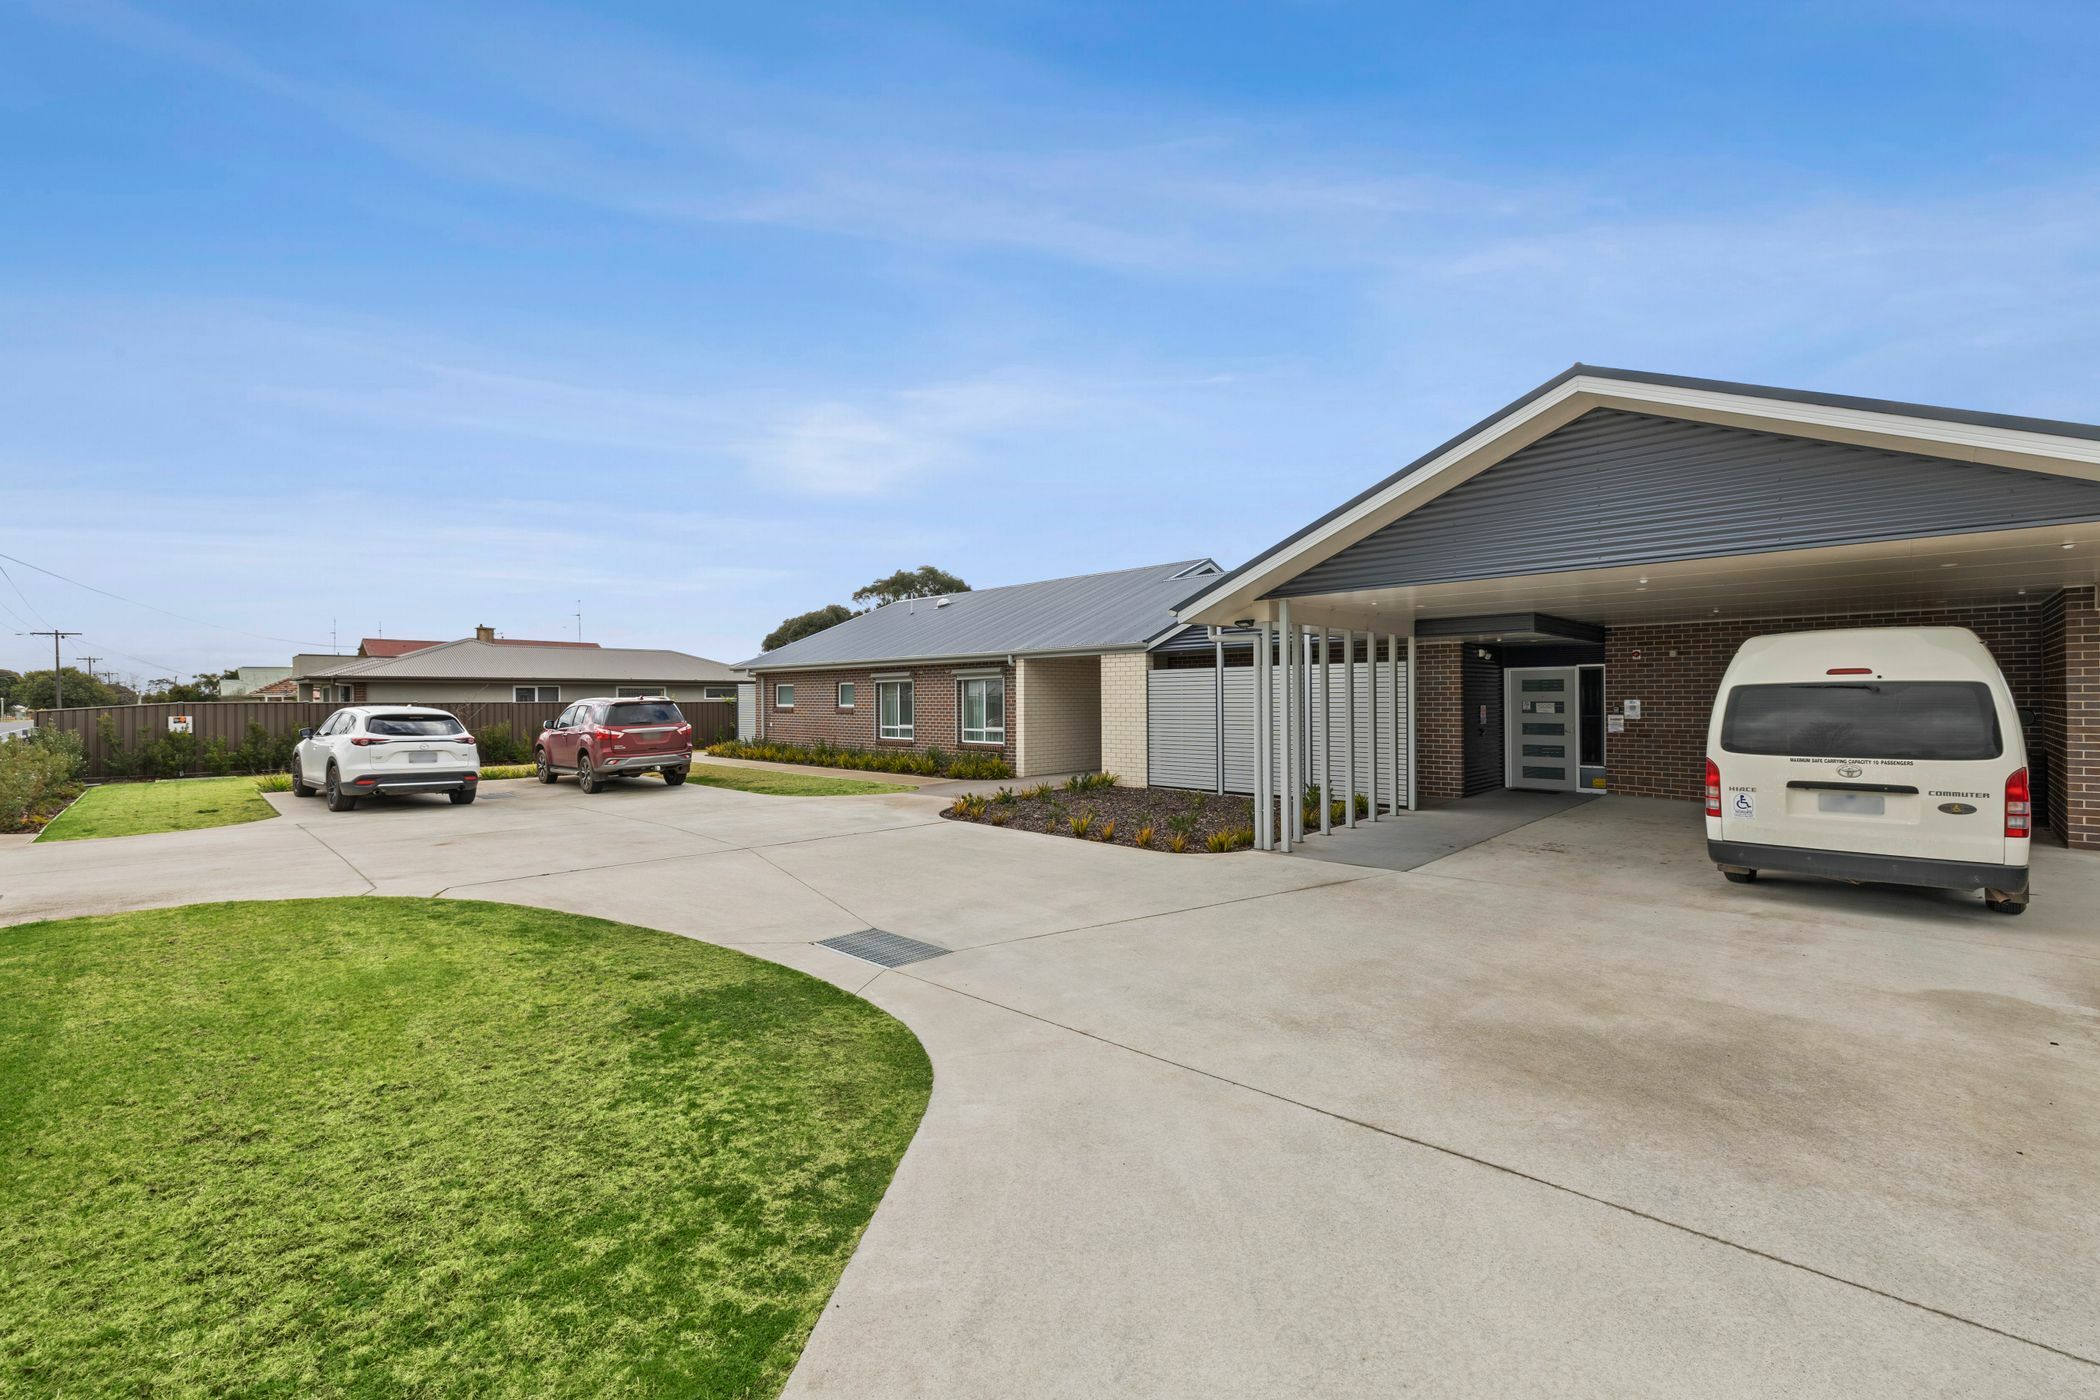 Driveway and carport area at SDA home in Colac